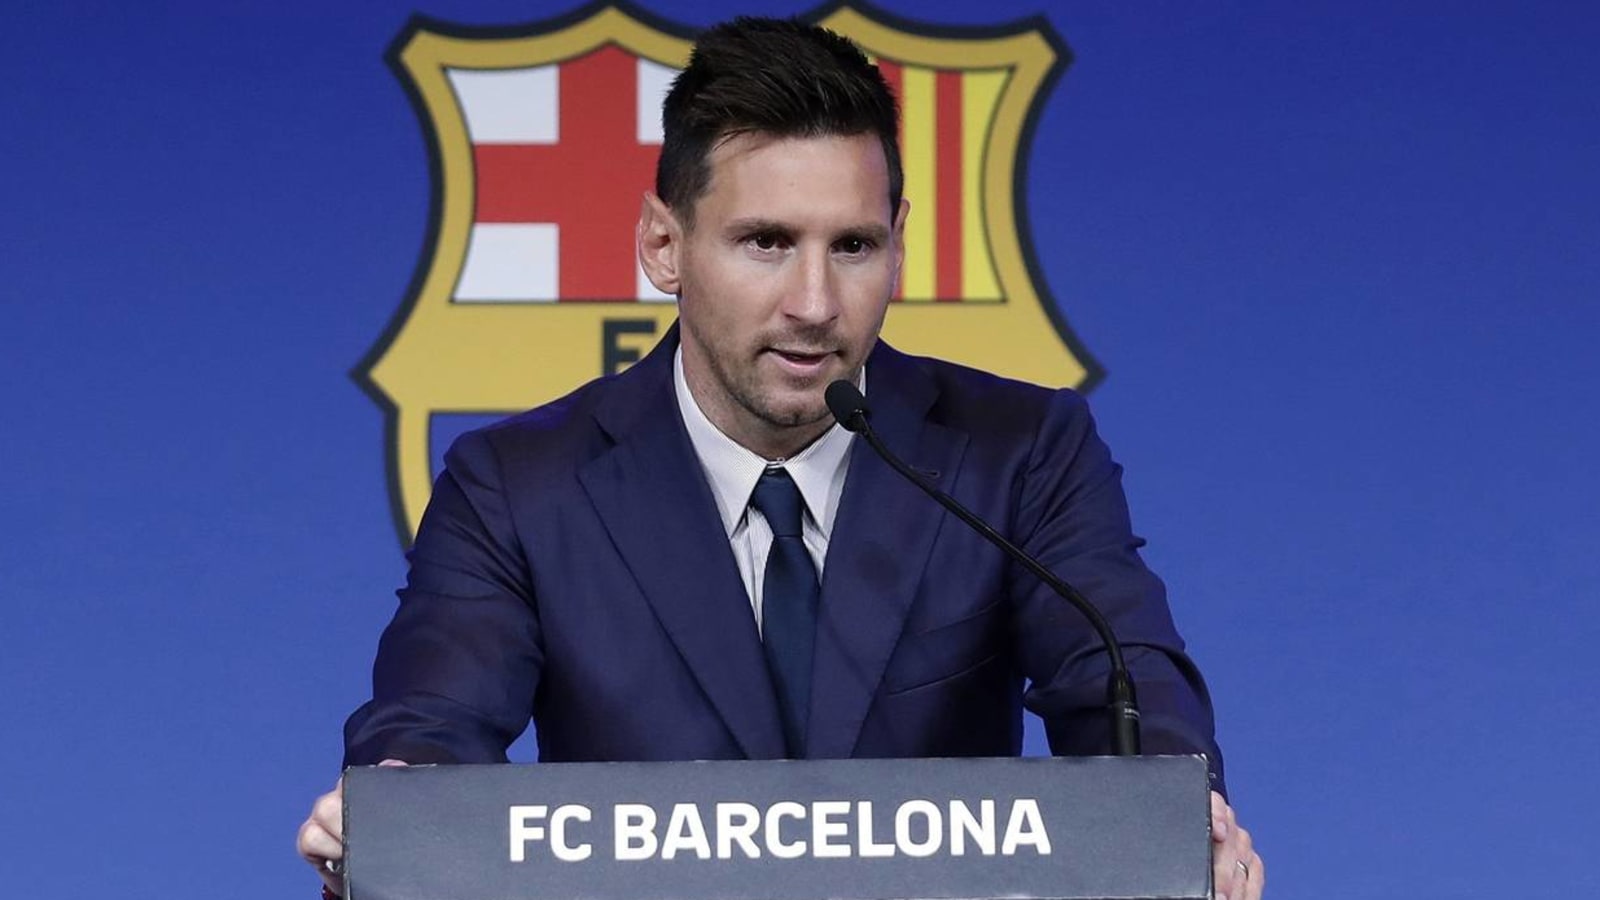 Messi arrives in Paris to sign new deal with PSG